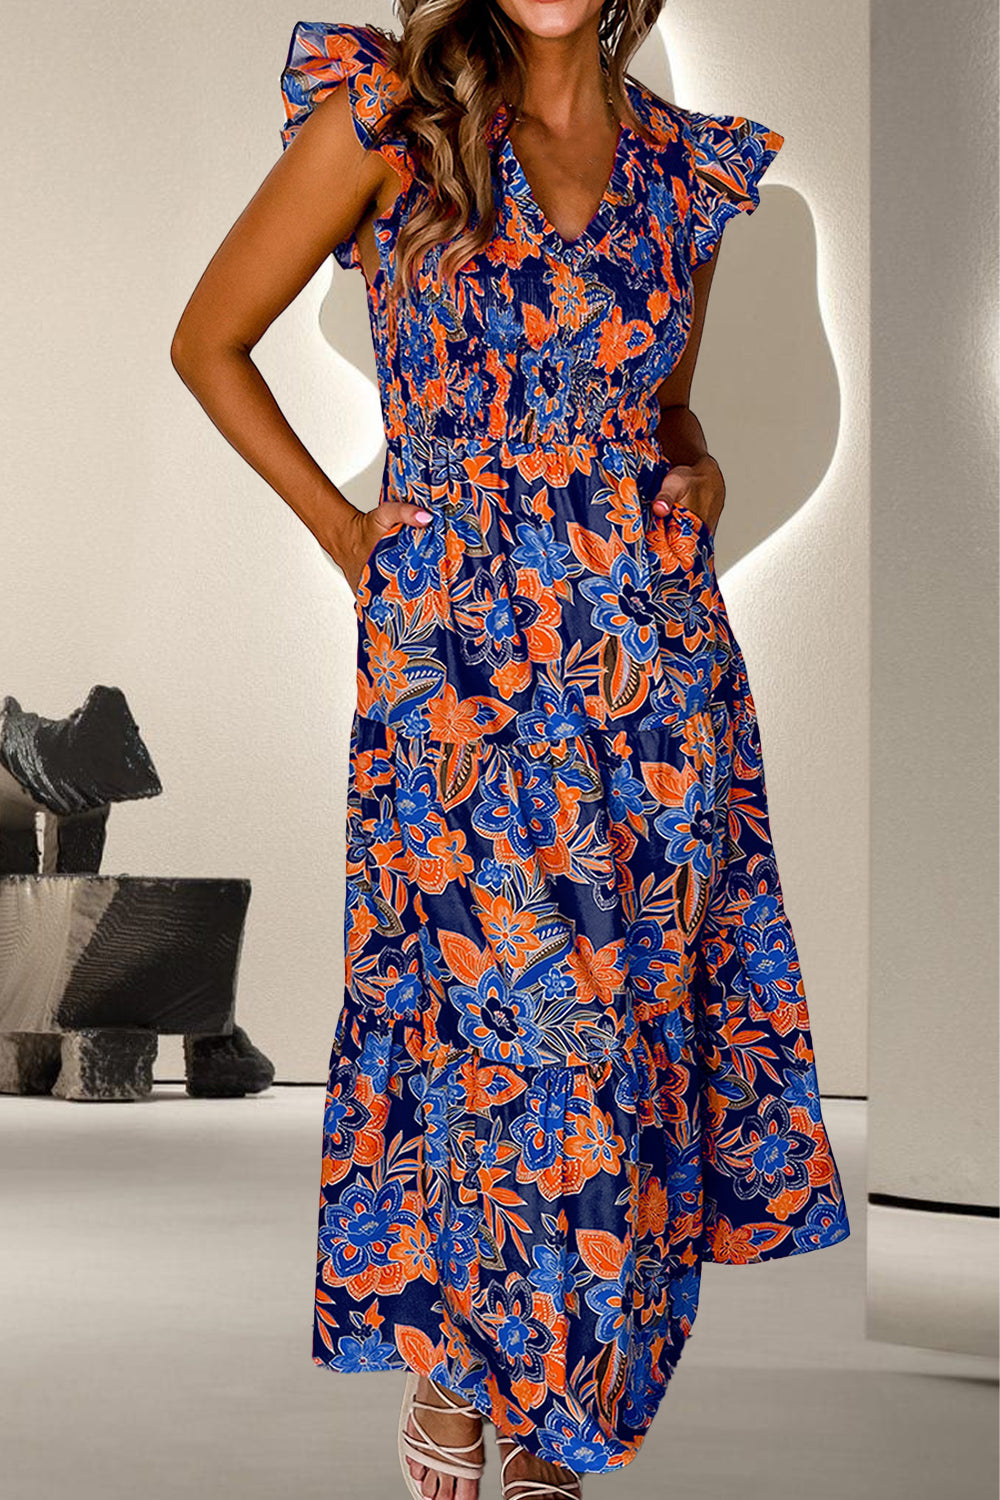 Summer Beach Wedding Guest Dress for Women Over 50: Ruffled Cap Sleeve Dress with Elegant Print, Perfect for Parties